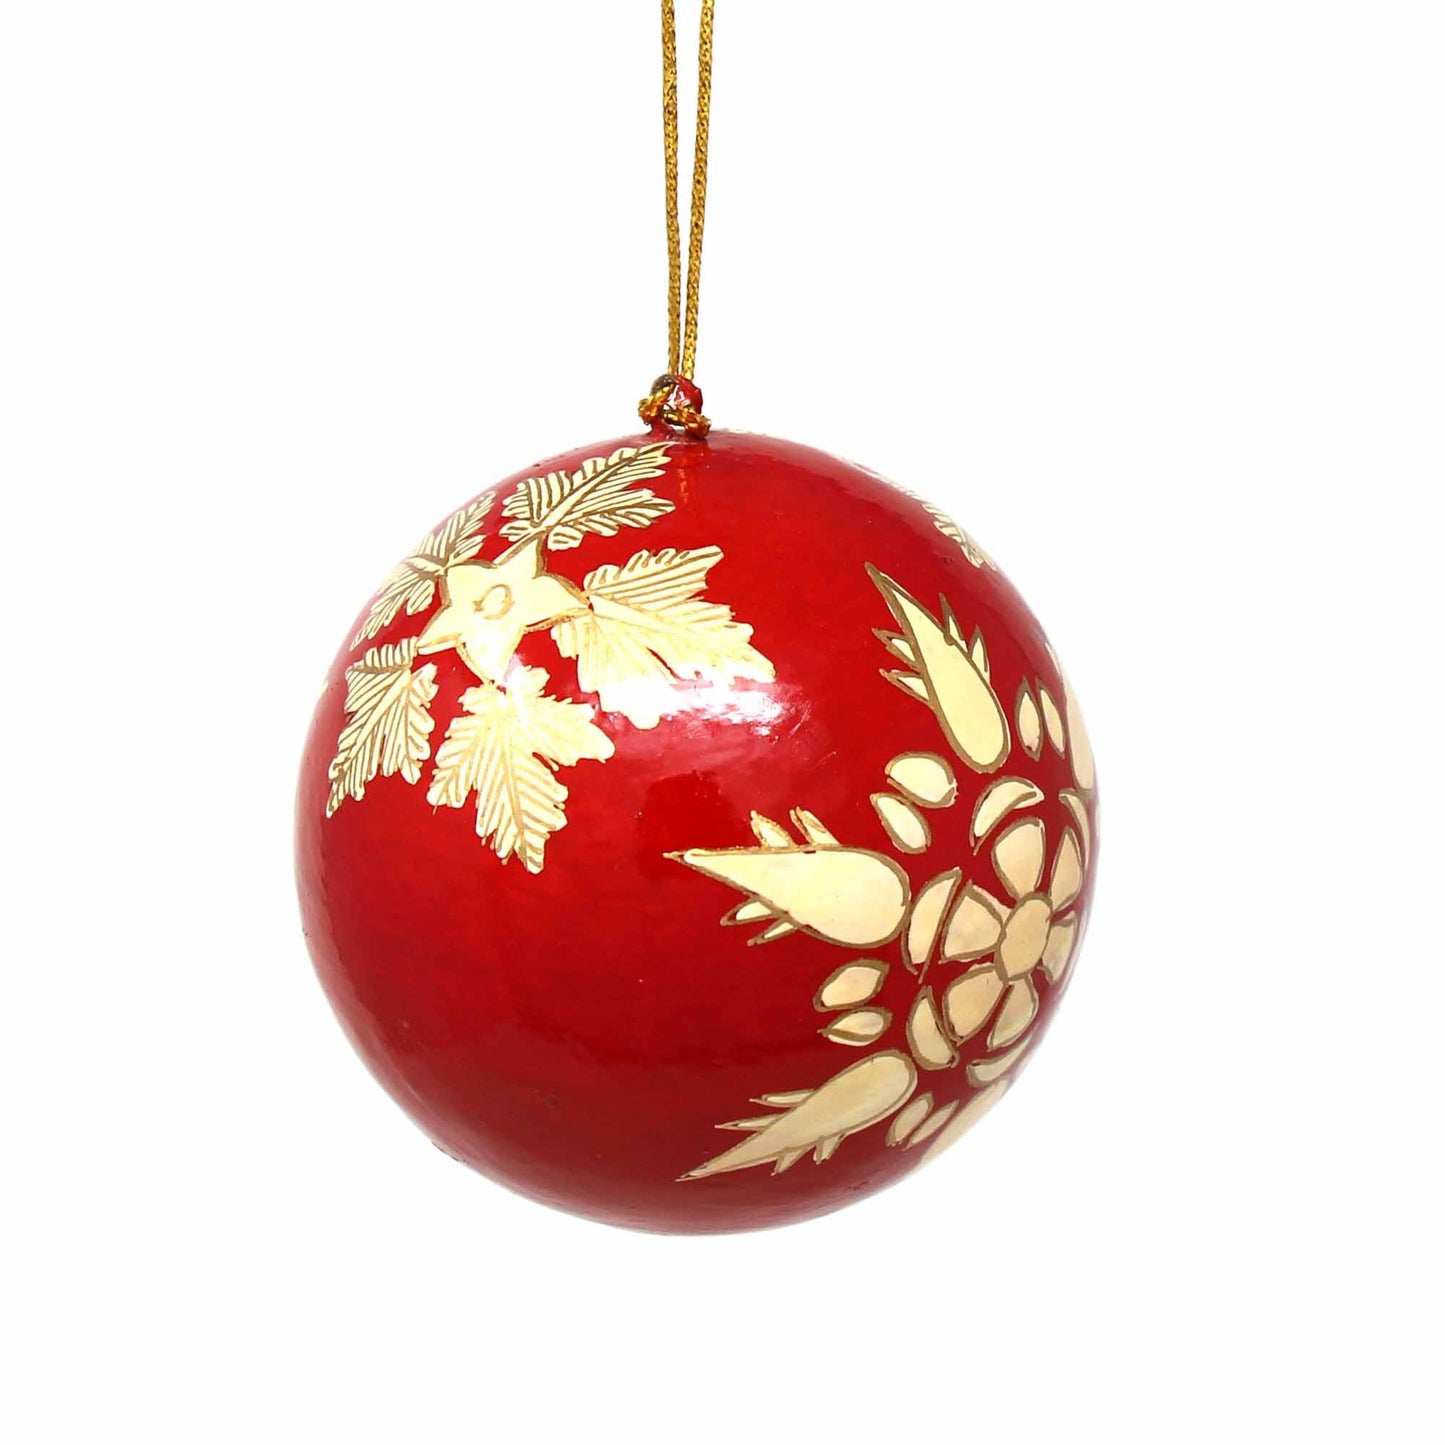 Handpainted Red and Gold Snowflake Papier Mache Hanging Ball Ornament - Linda Kay Gifford’s - Those Nasty Women TALK! by SWEETSurvivor